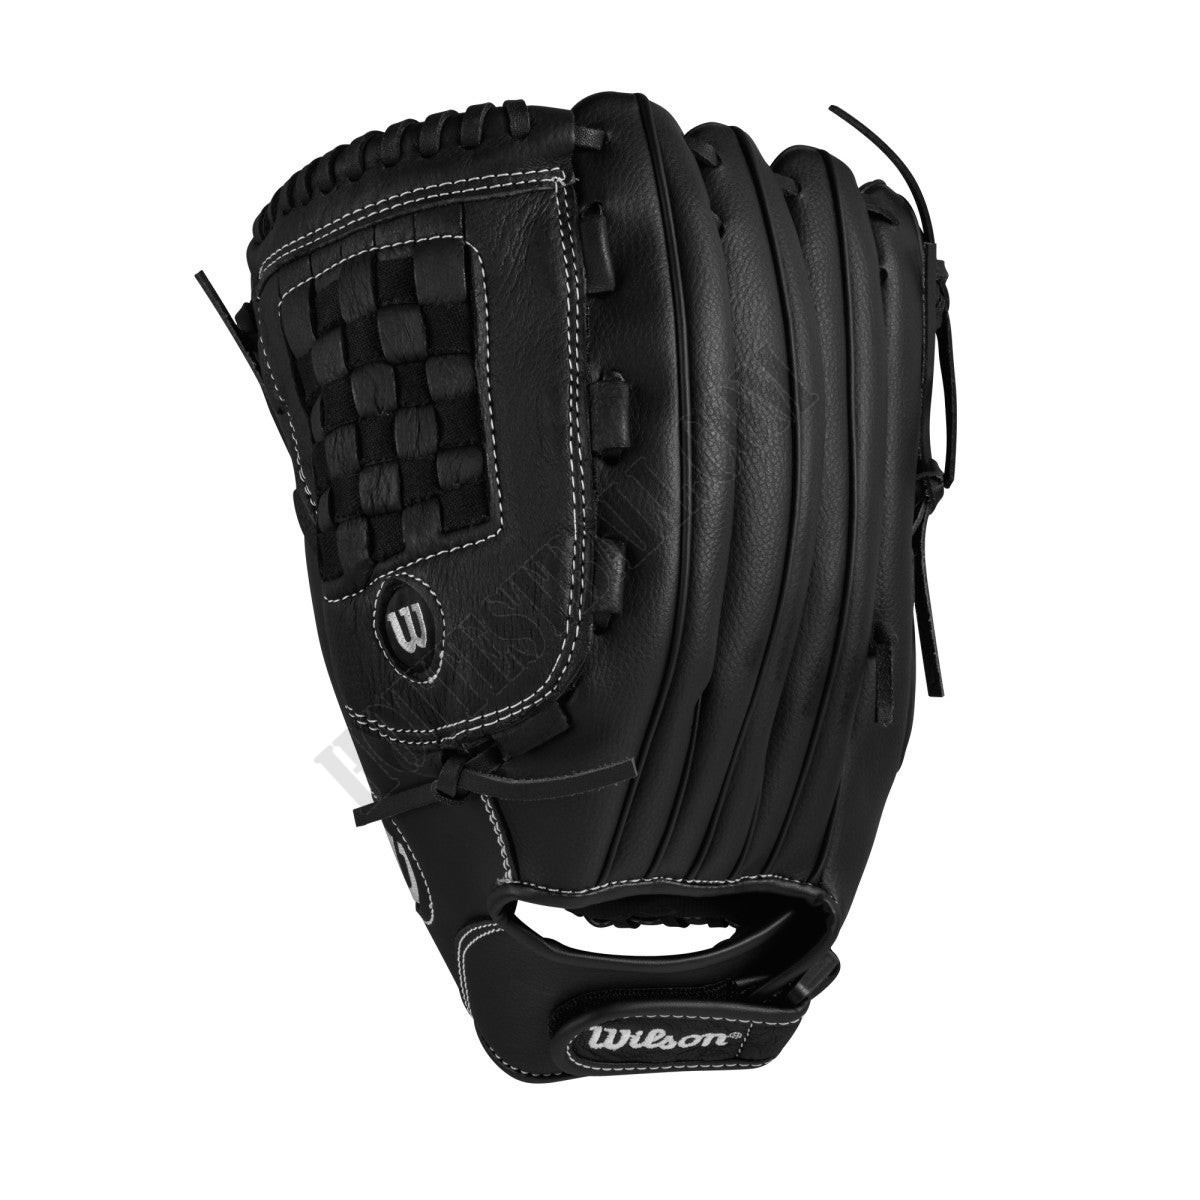 A360 14" Slowpitch Glove - Left Hand Throw ● Wilson Promotions - -2